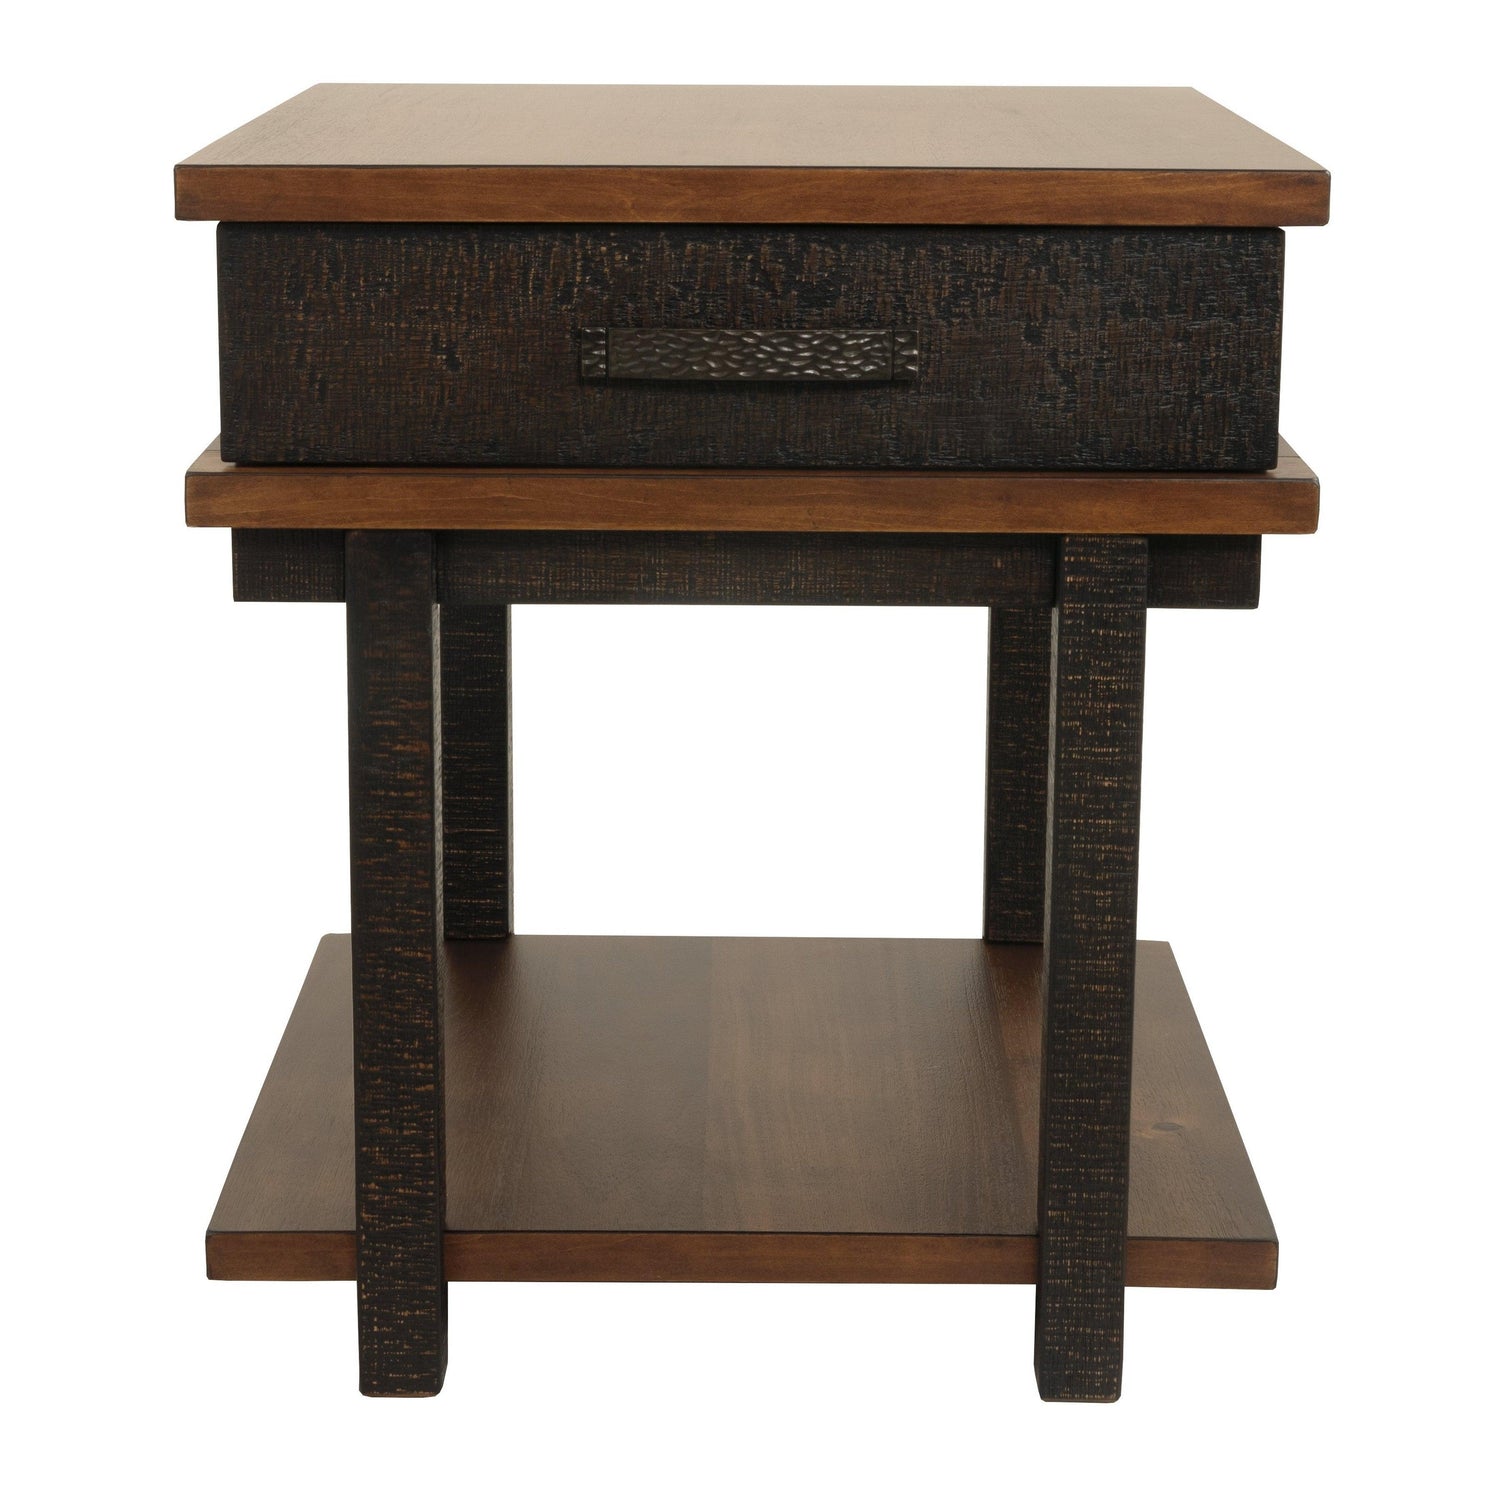 Stanah End Table Ash-T892-3